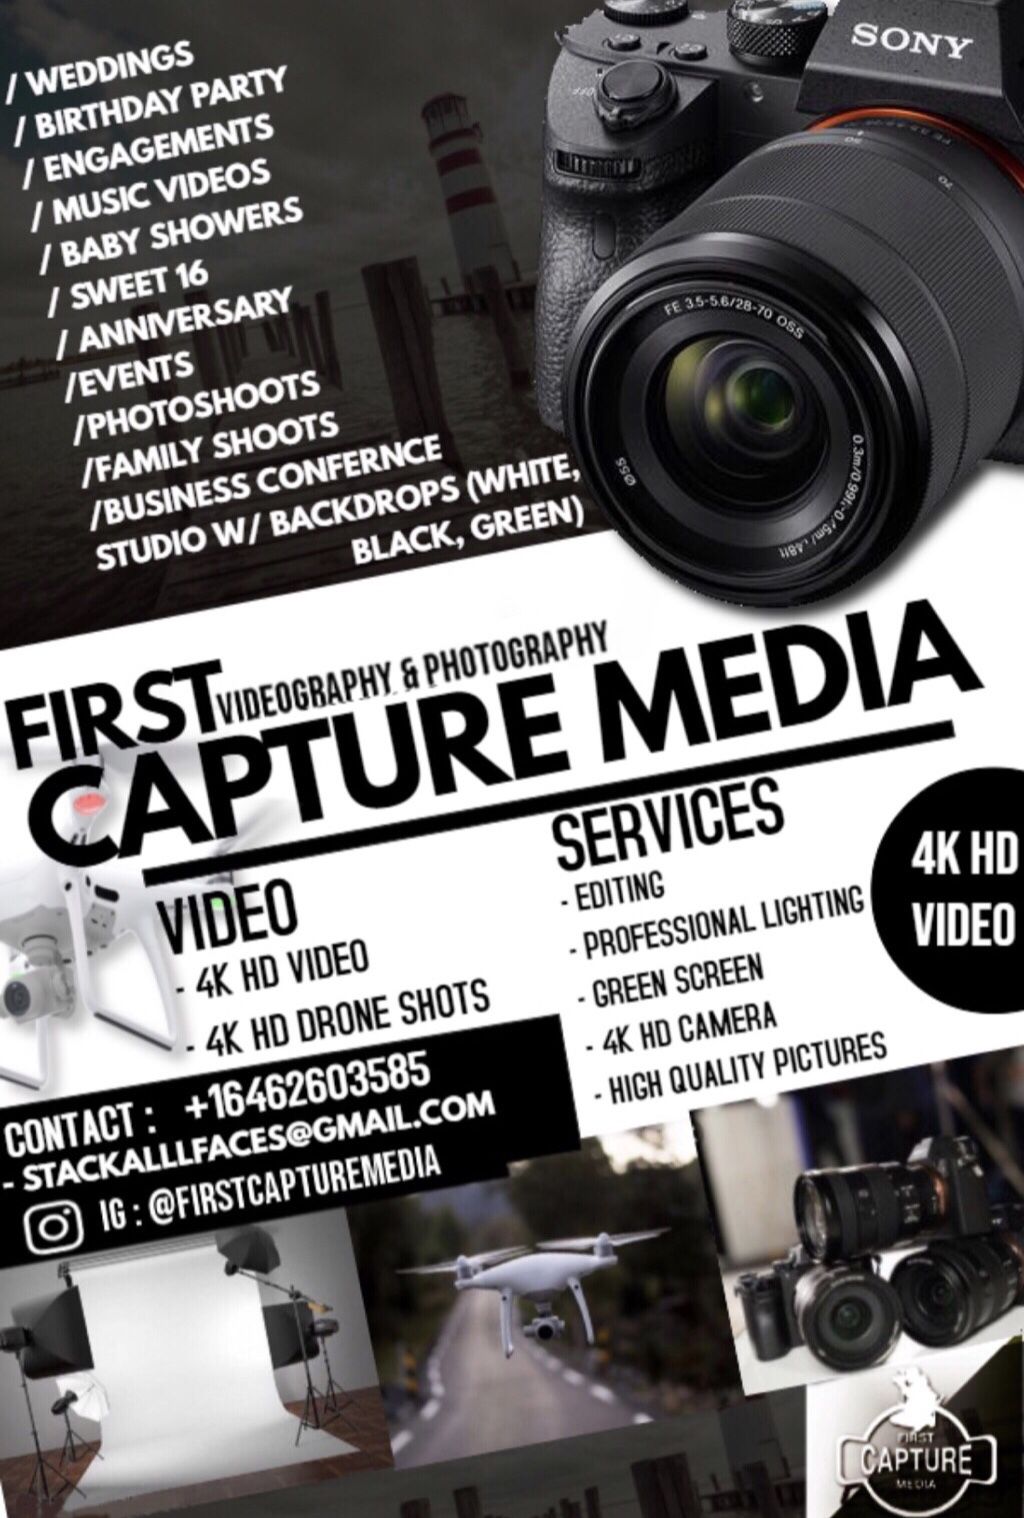 Photography or videography